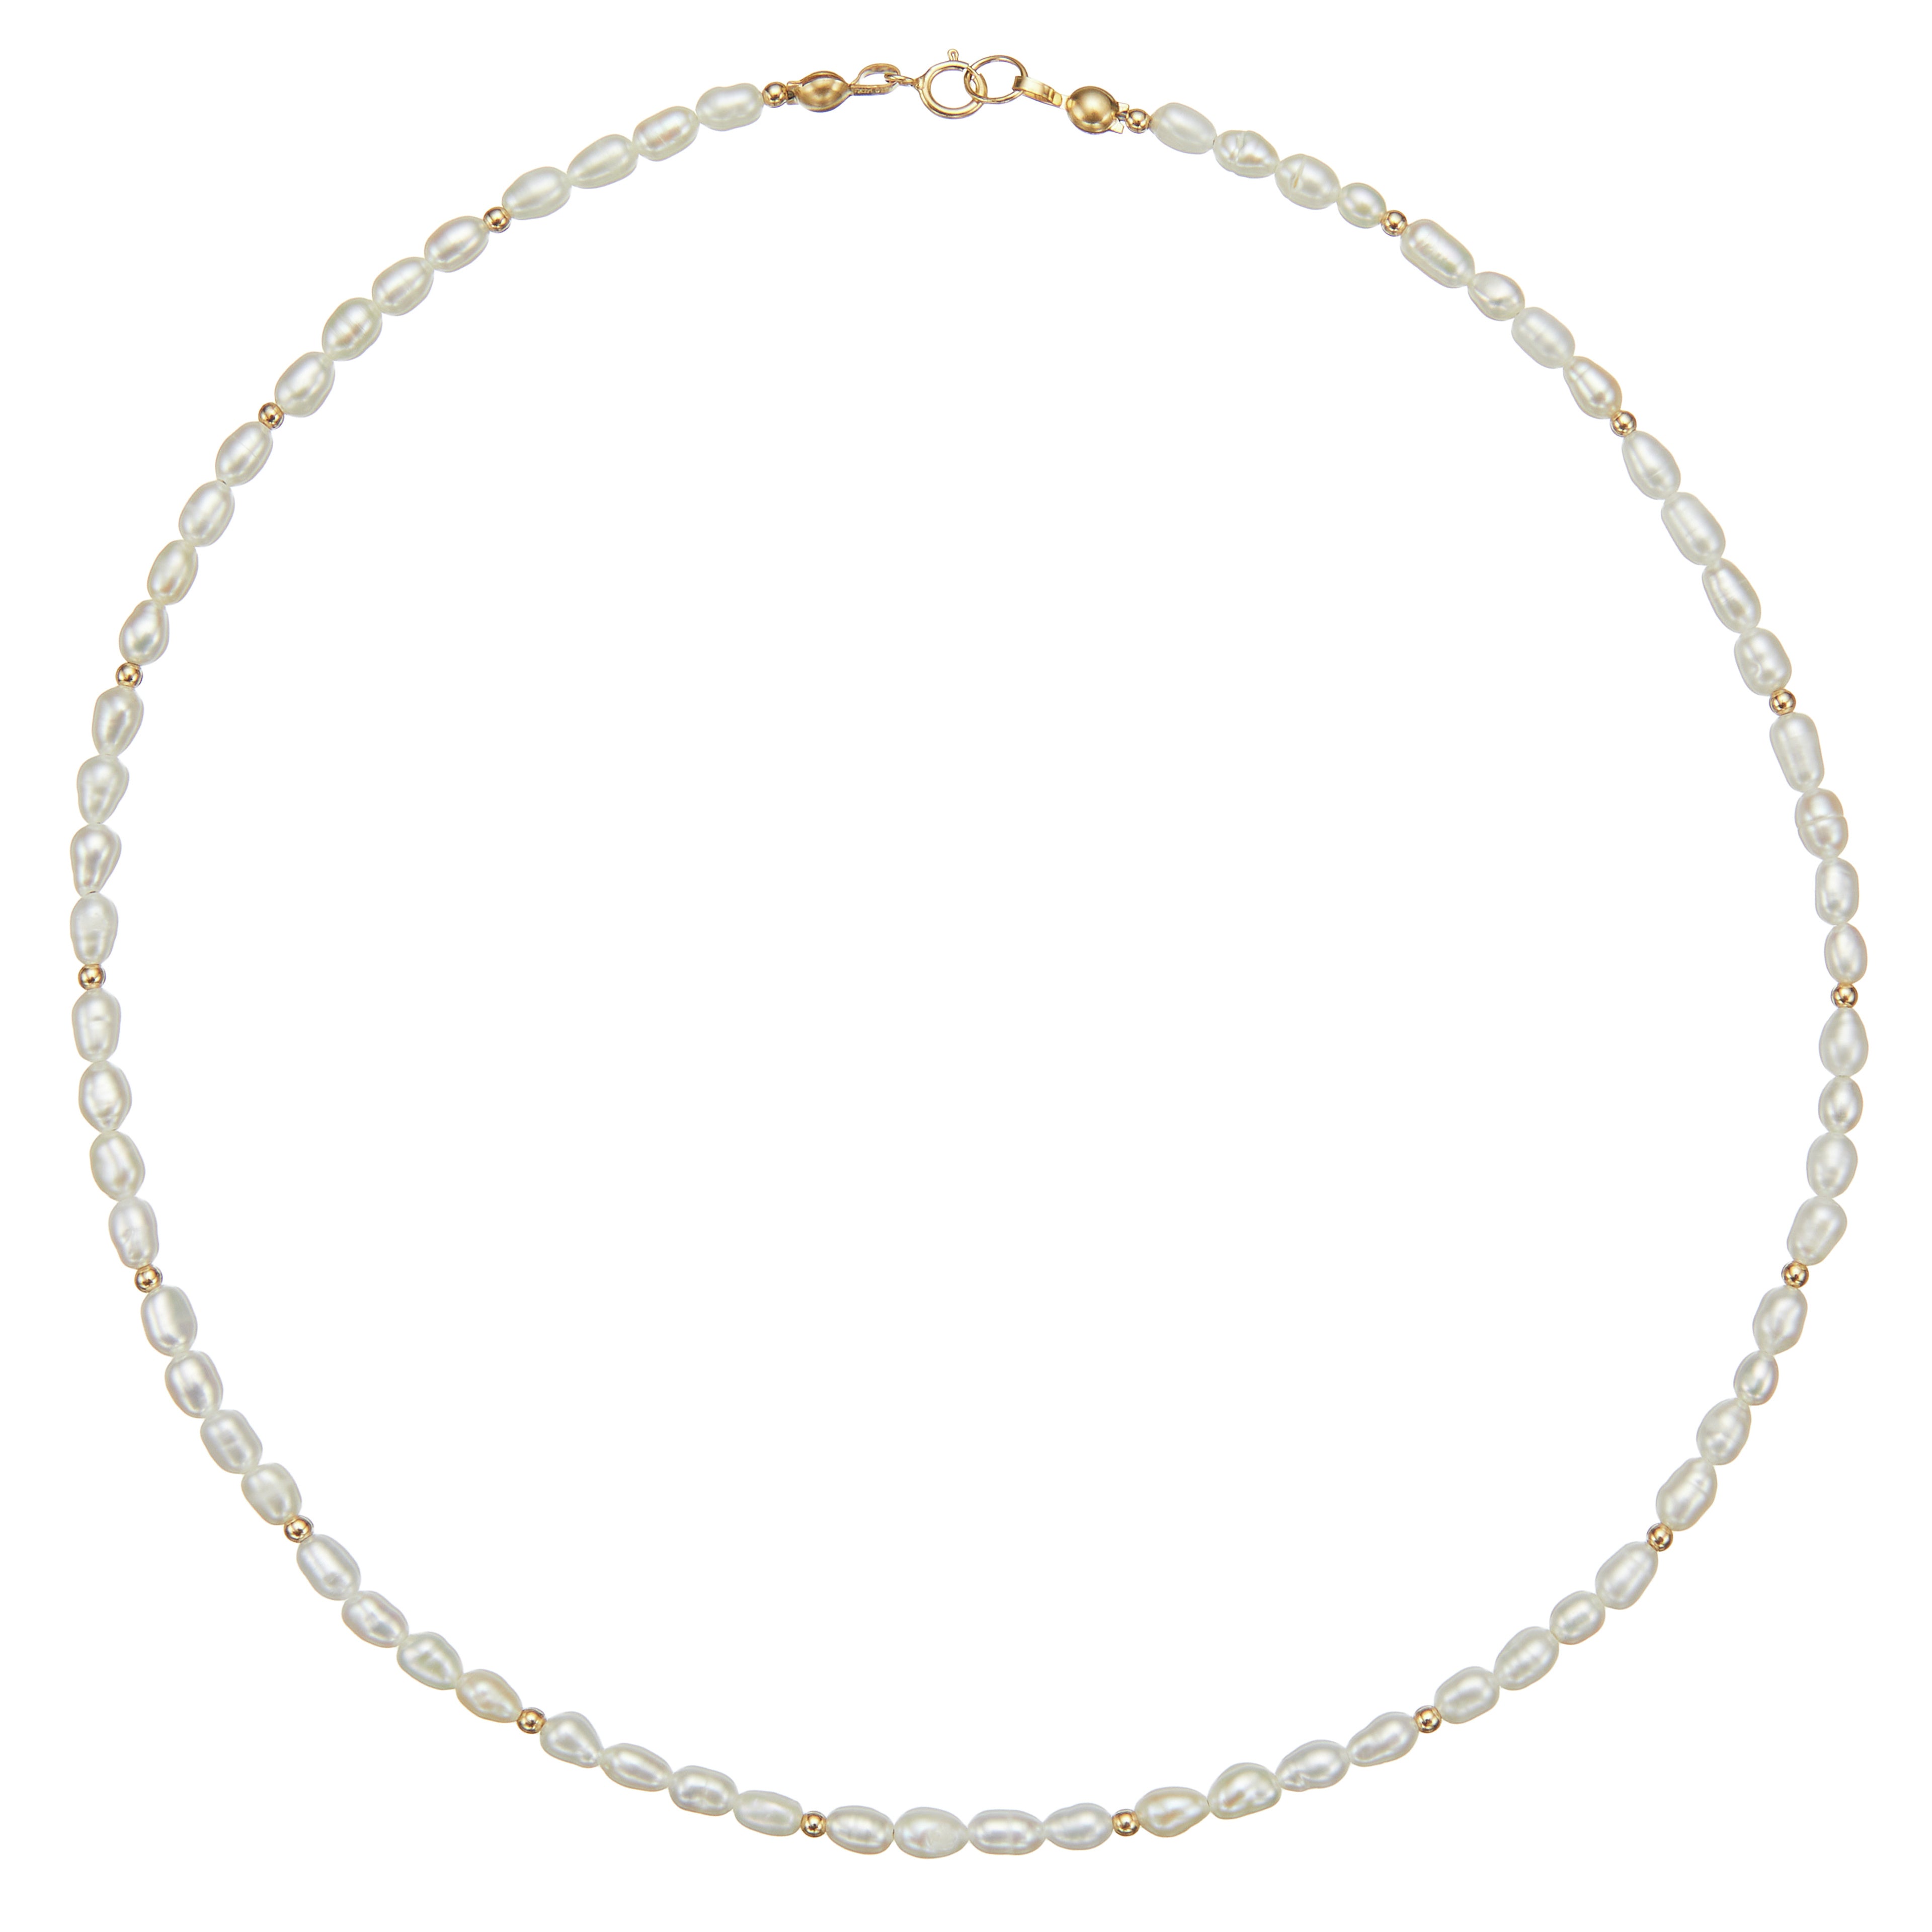 Gold beaded seed pearl choker on a white background